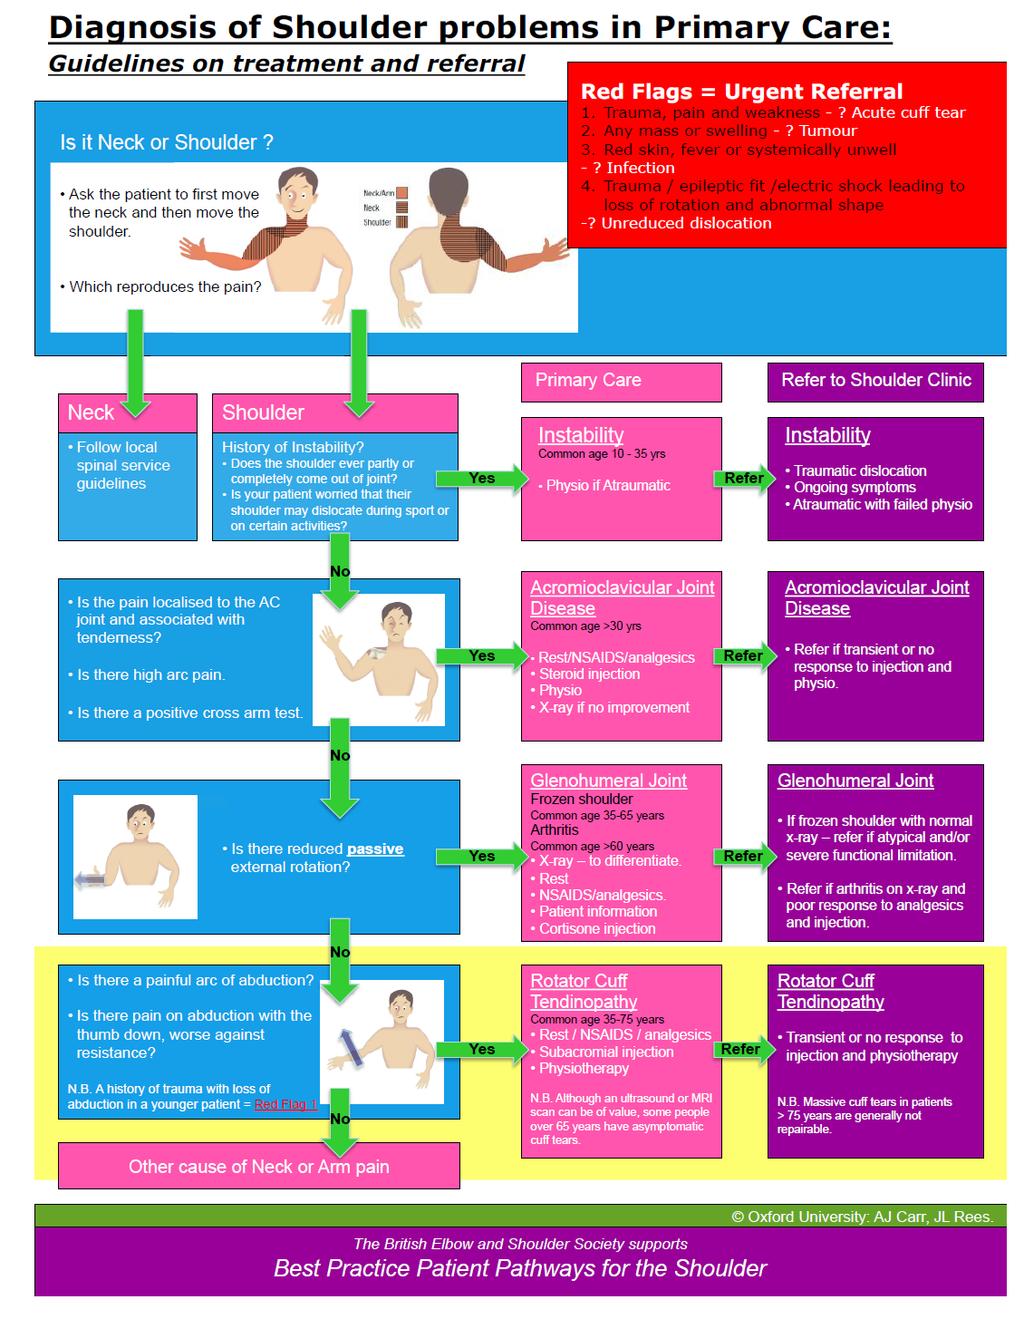 Appendix 3 Algorithm for management of shoulder pain in primary care Source: Produced by Oxford